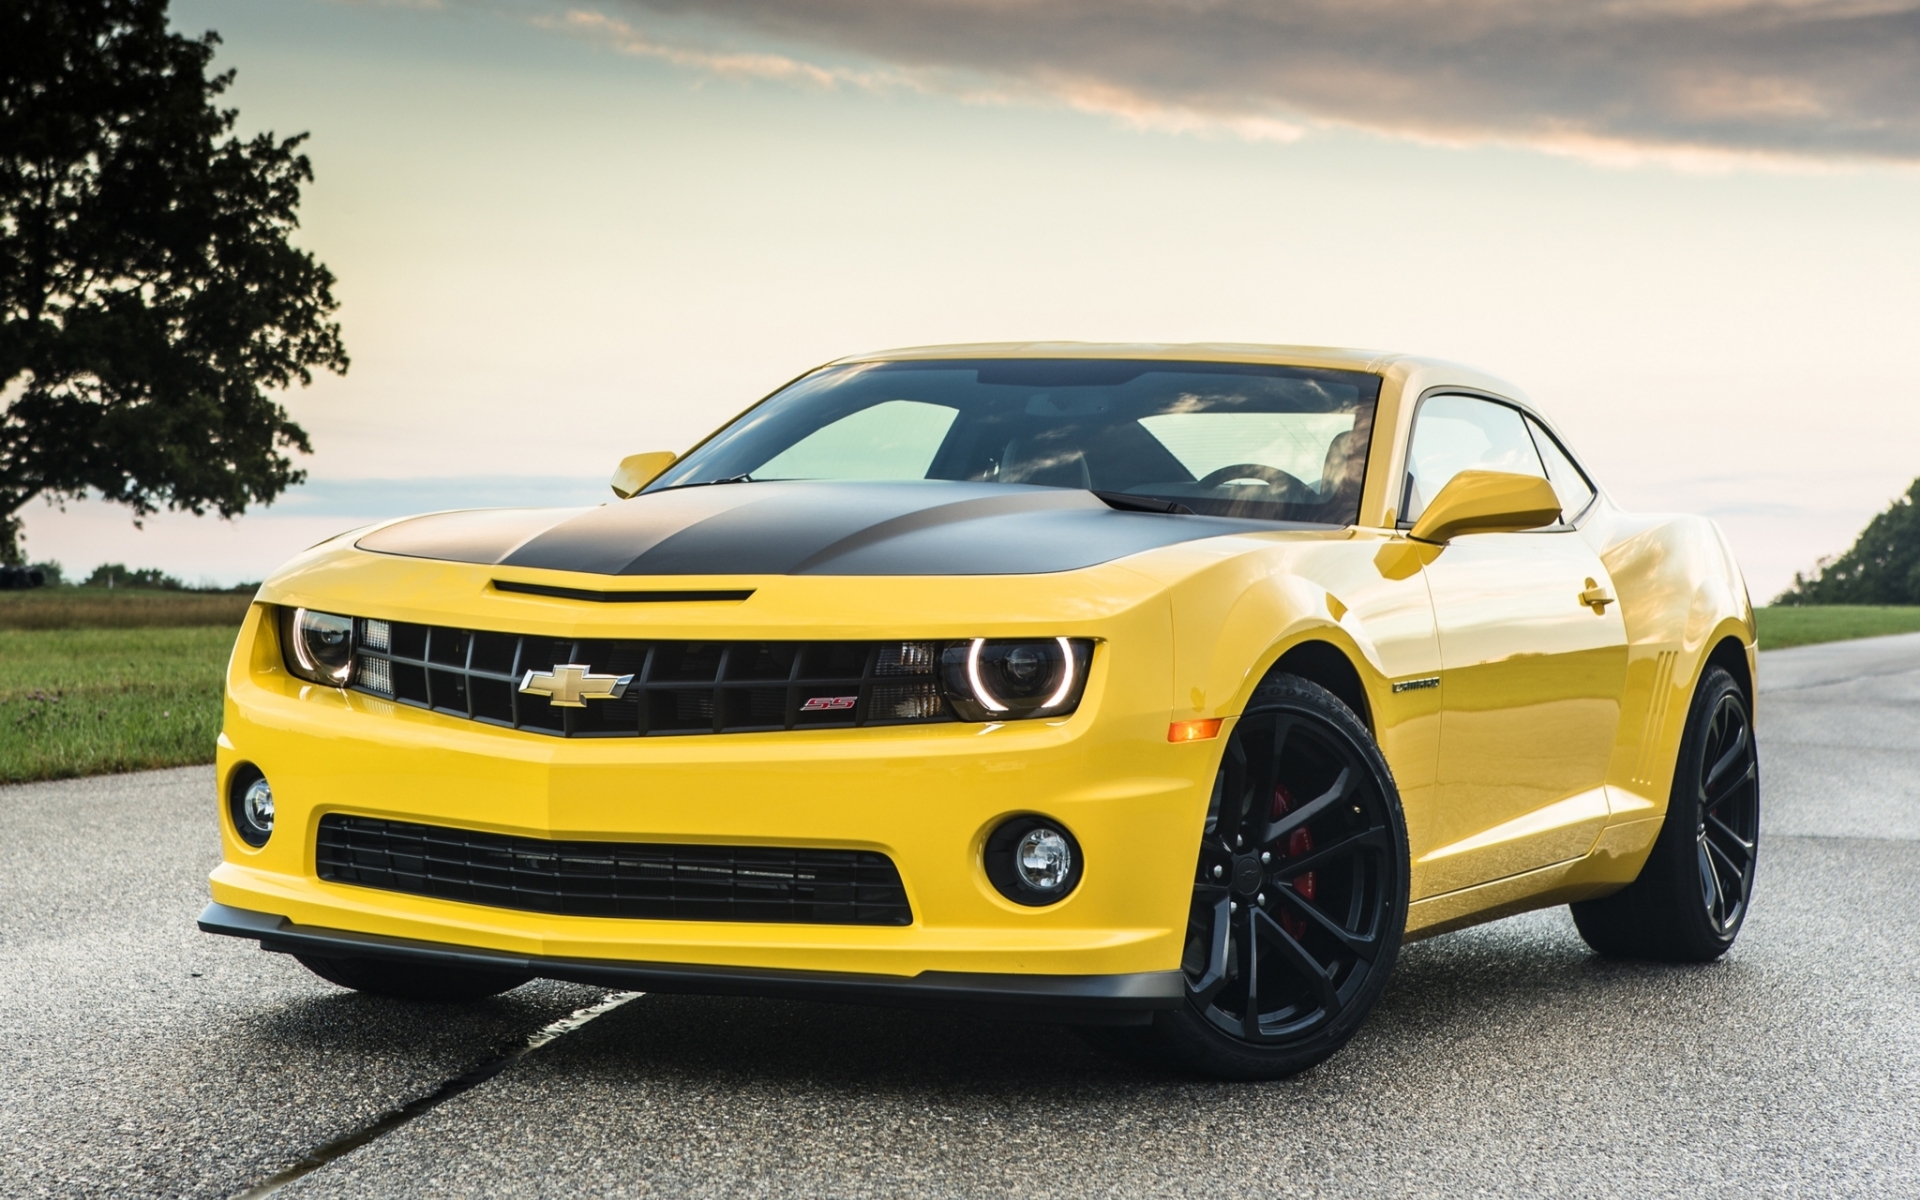 chevrolet, Camaro, Yellow, Front, Muscle, Car, Muscle, Car, Road, Tree, Sky Wallpaper